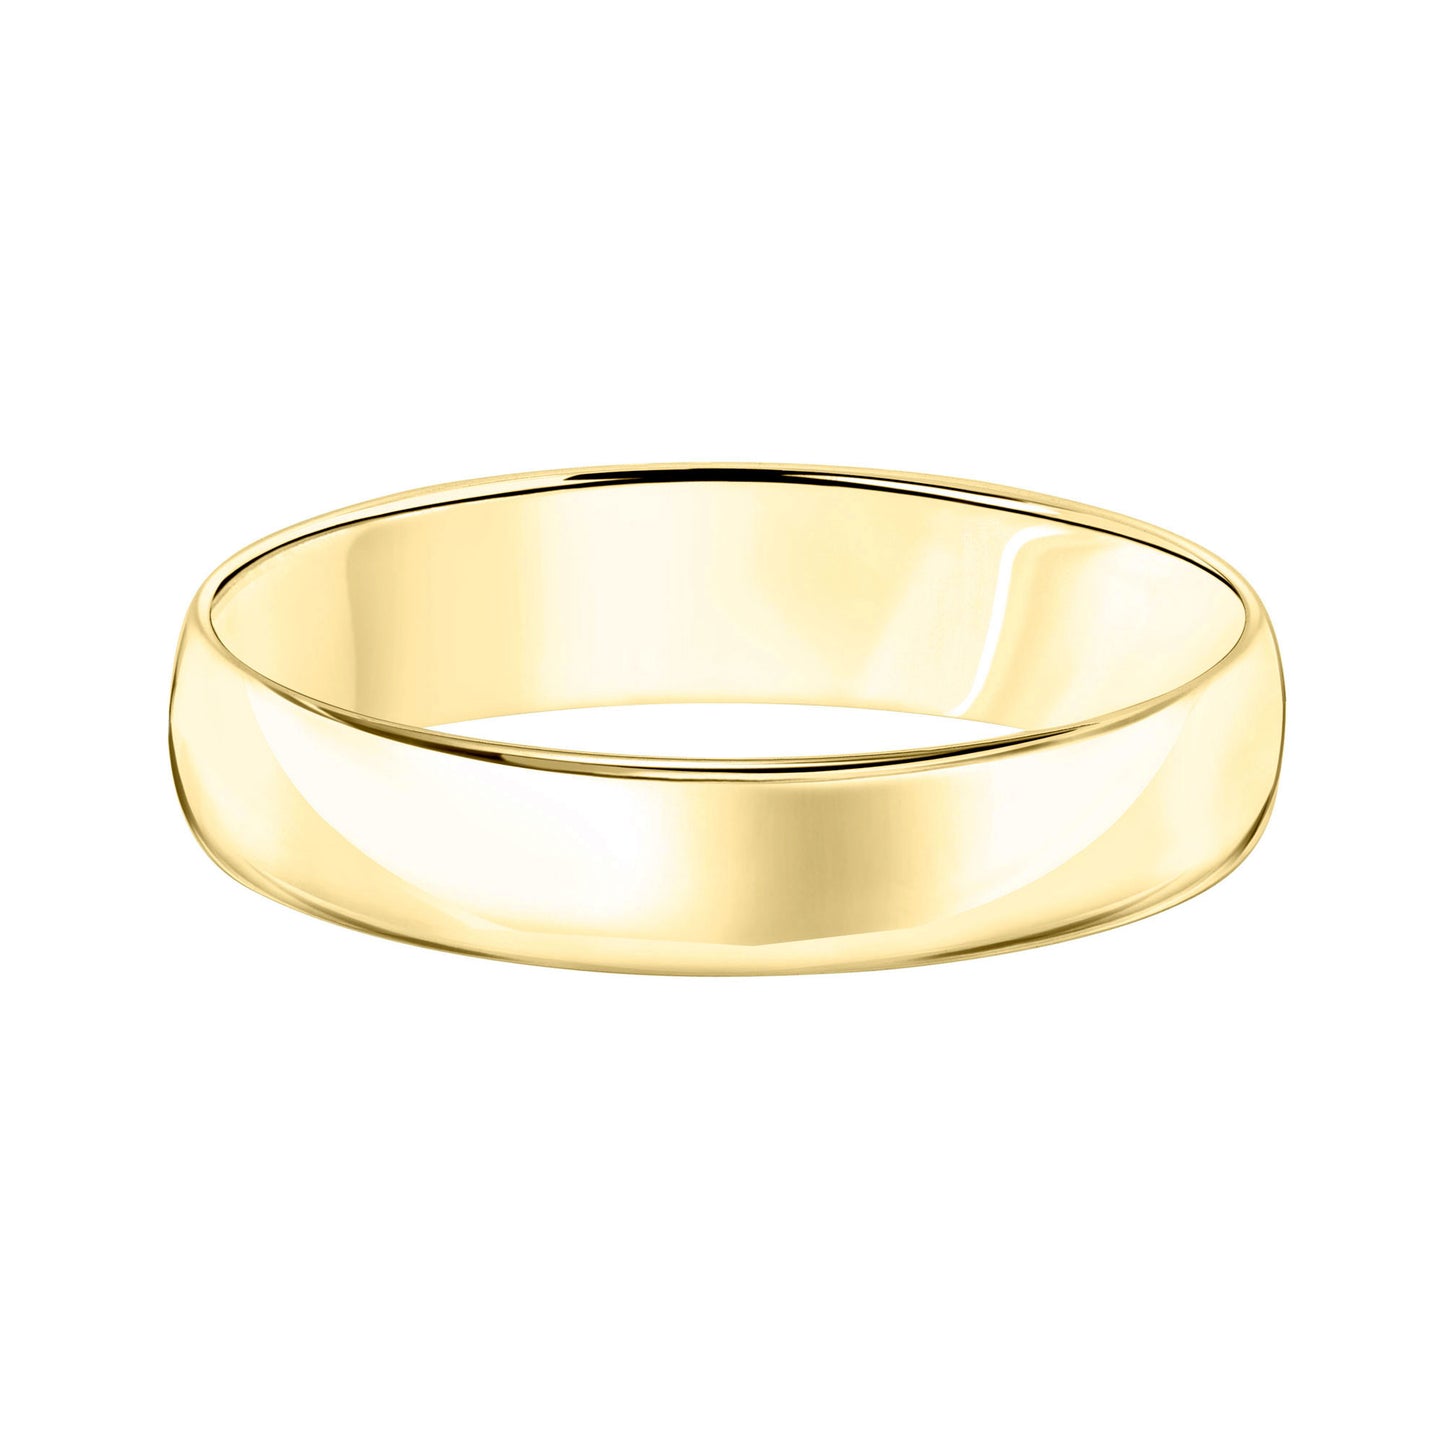 Roux 4mm Light Low Dome Wedding Ring